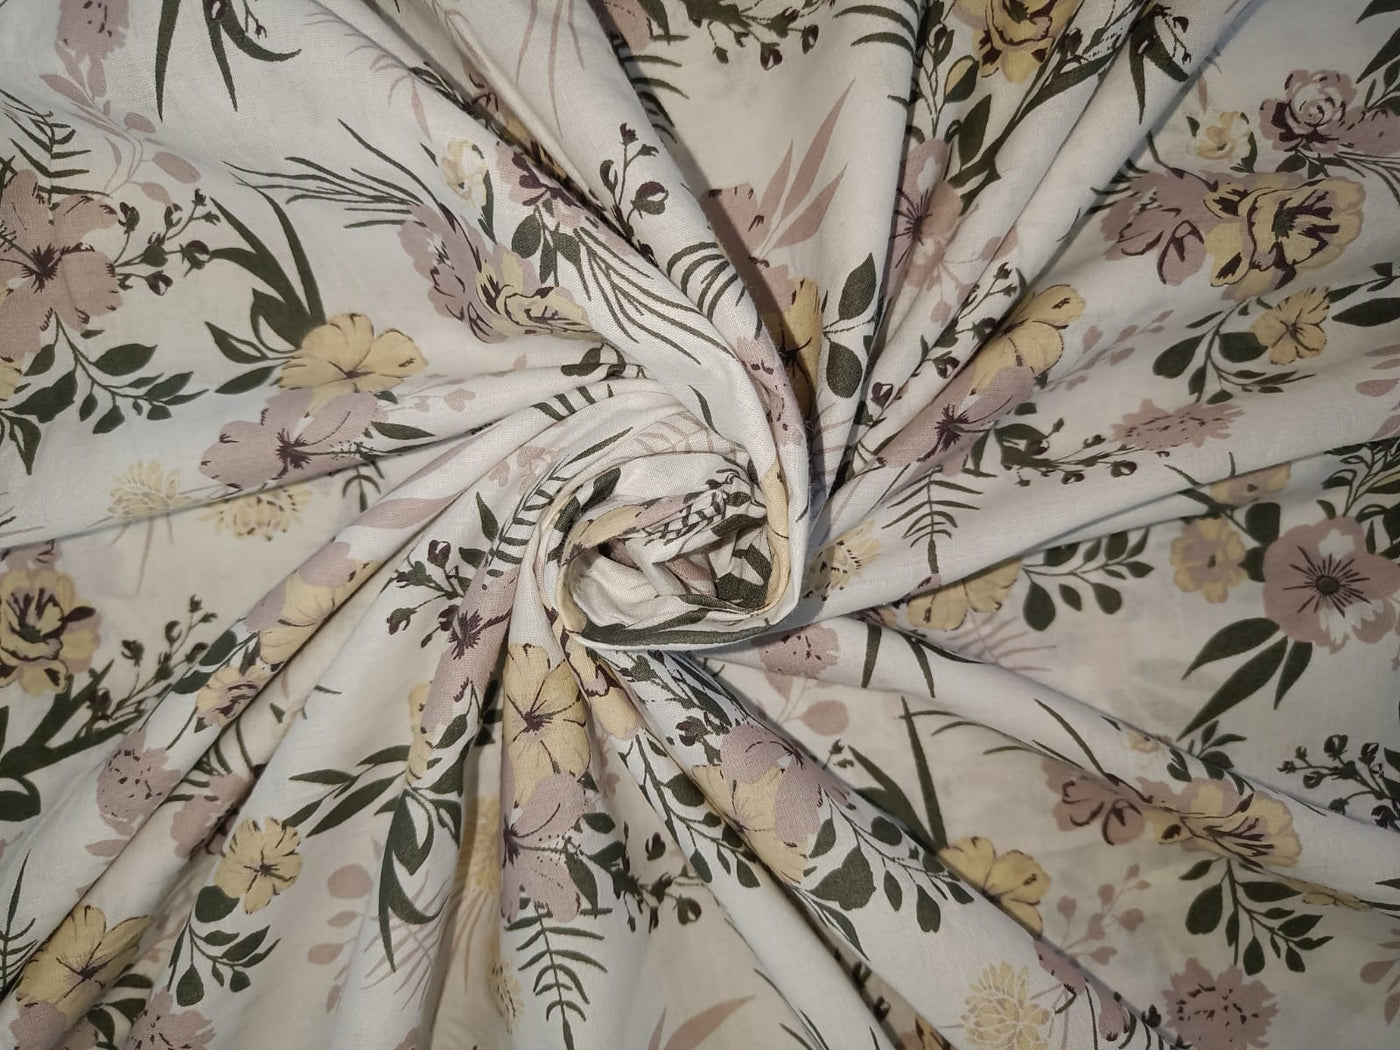 100% Pure Cotton lawn pastel floral  printed fabric  58" wide